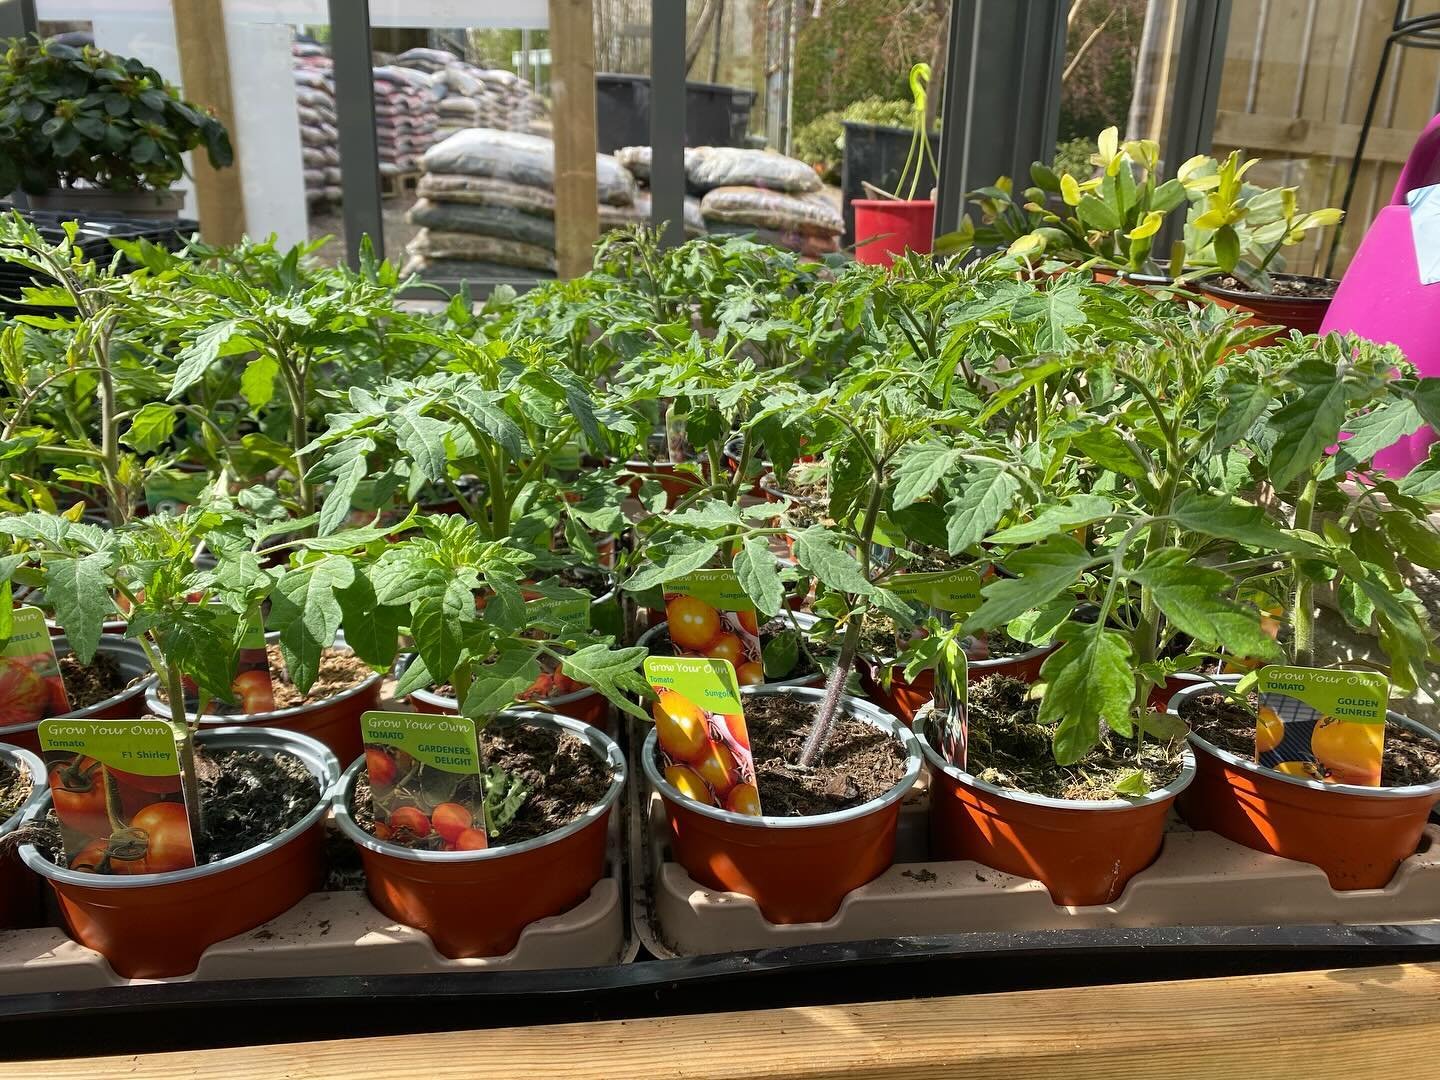 Tomato plants now available! As well as chilli&rsquo;s, peppers, courgettes and lots of vegetable packs. #millgardencentre #growyourown #veg #garden #gardening #plants